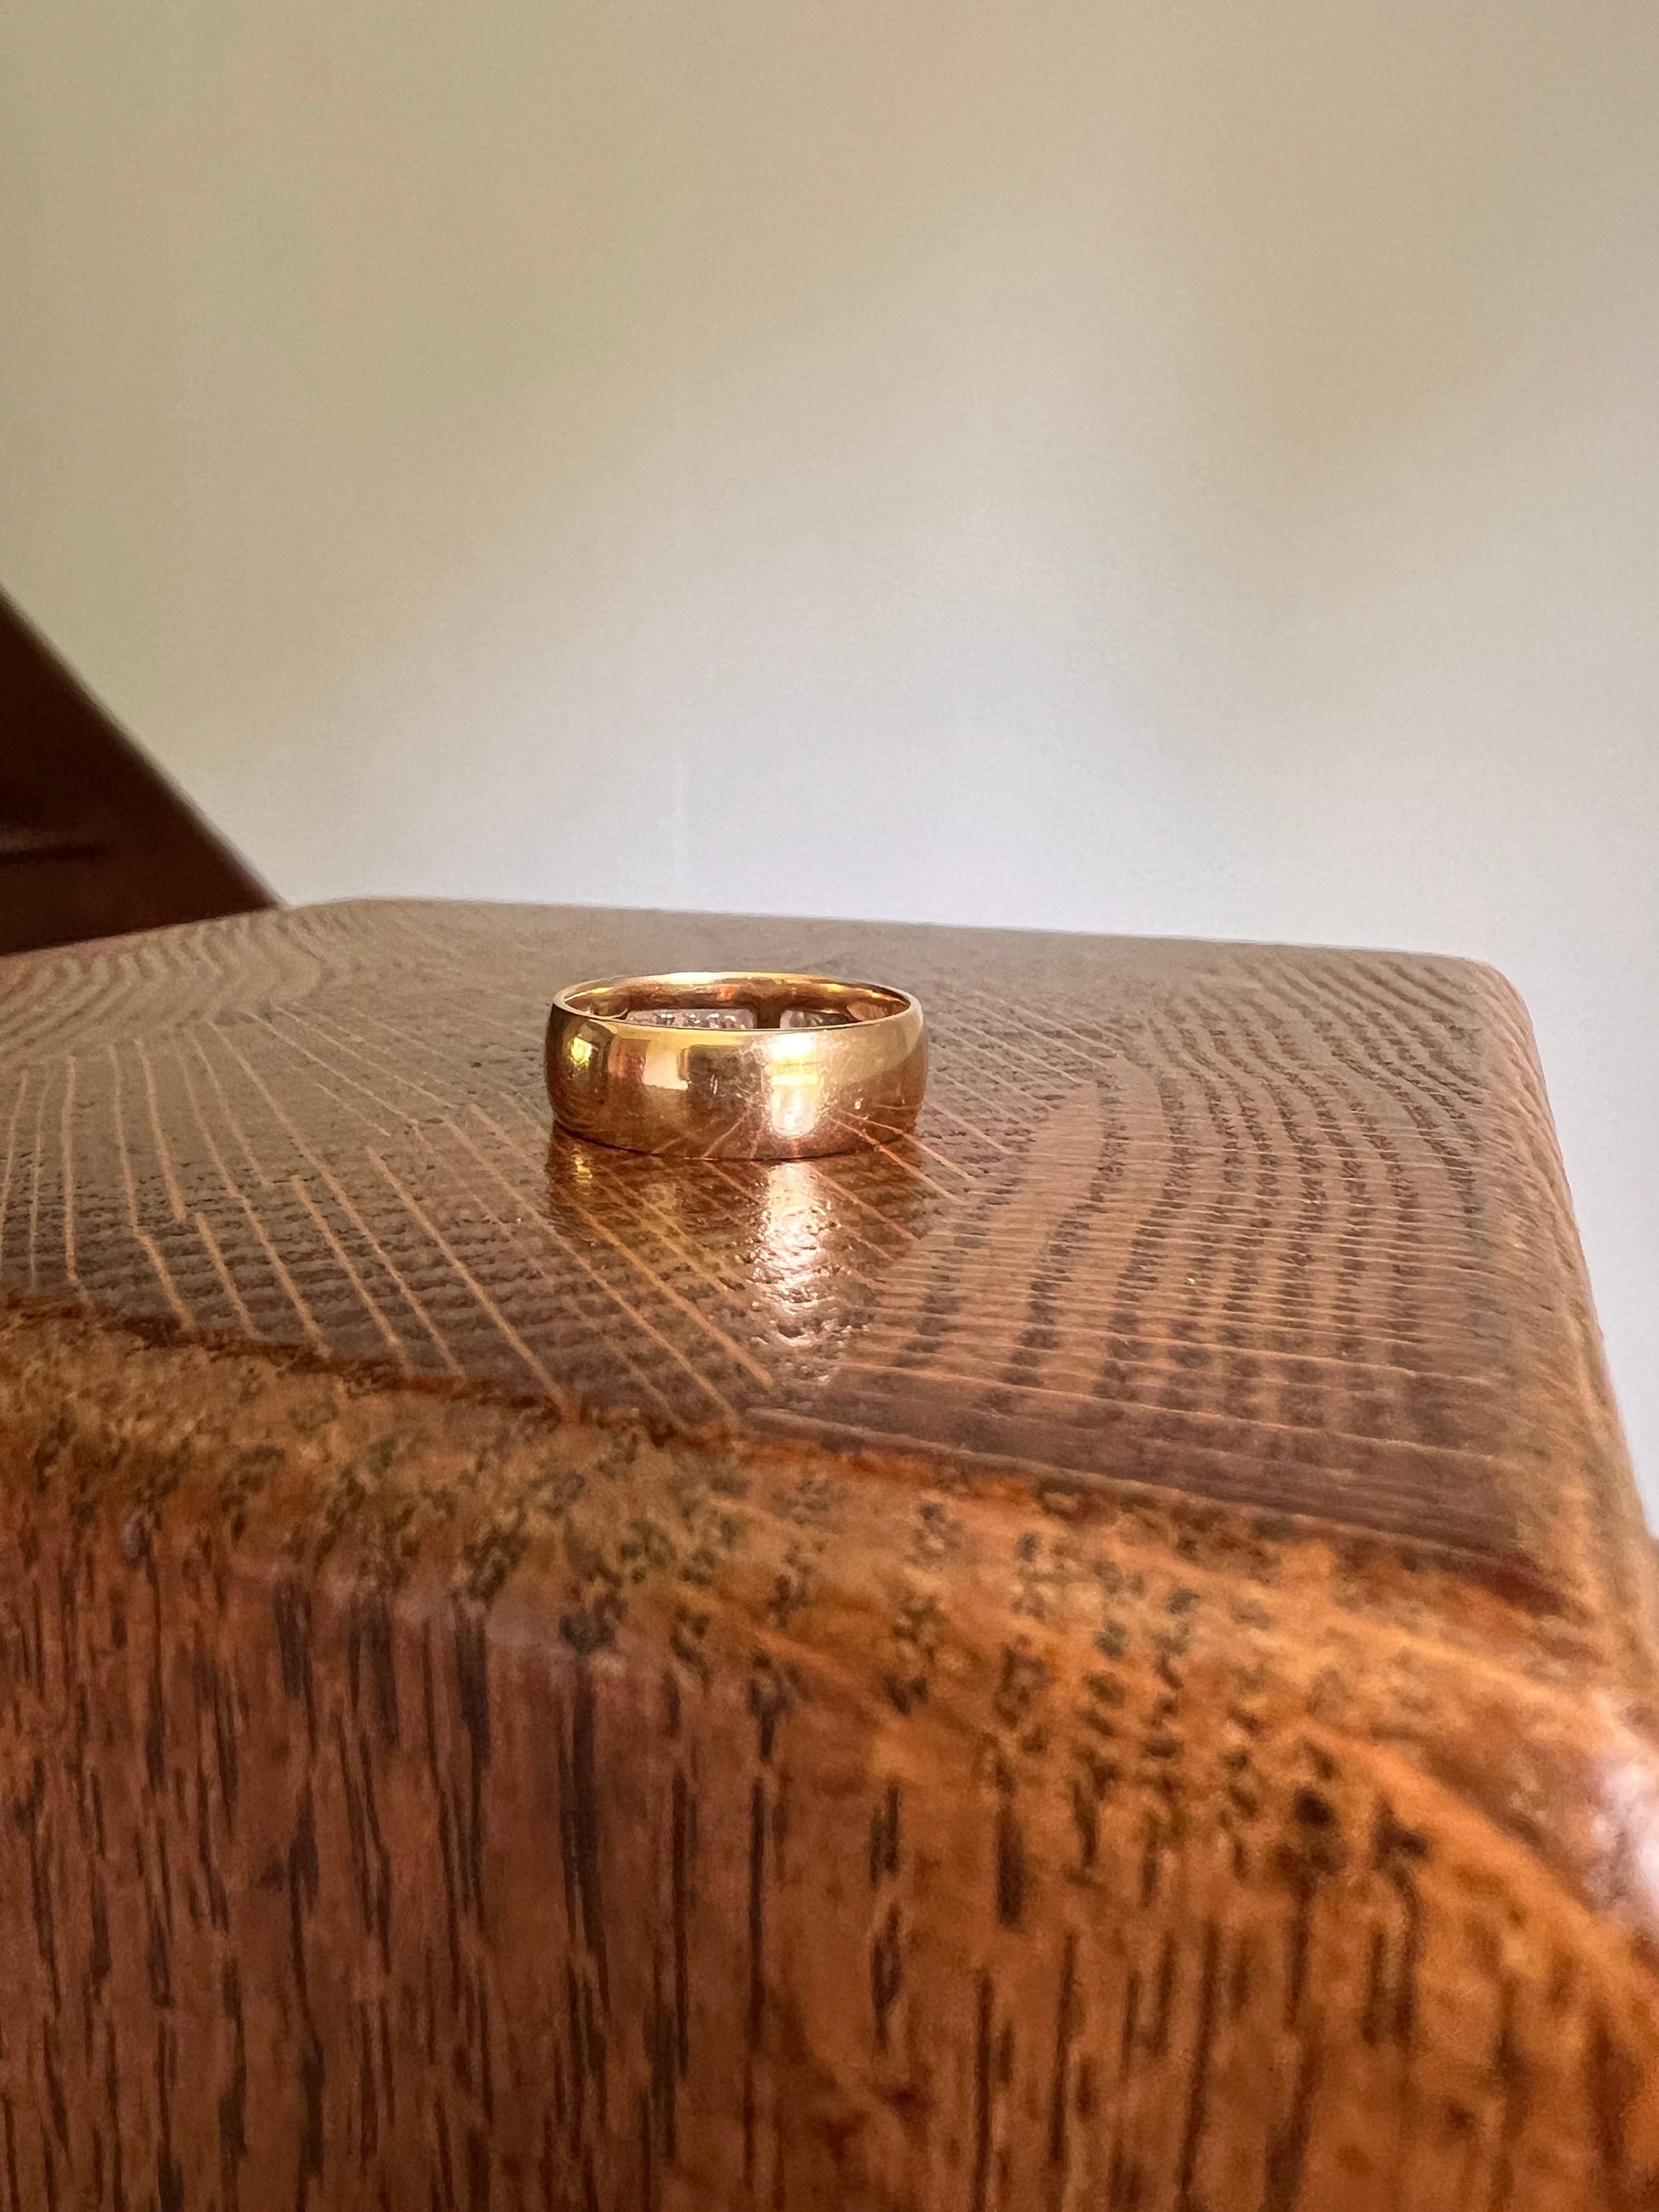 DATED 1910 Edwardian 5.8mm Wedding Band Antique 5g 18k Gold Solid Ring Stacker Romantic Gift Chunky Sturdy Warm Patina D Shaped Engraved